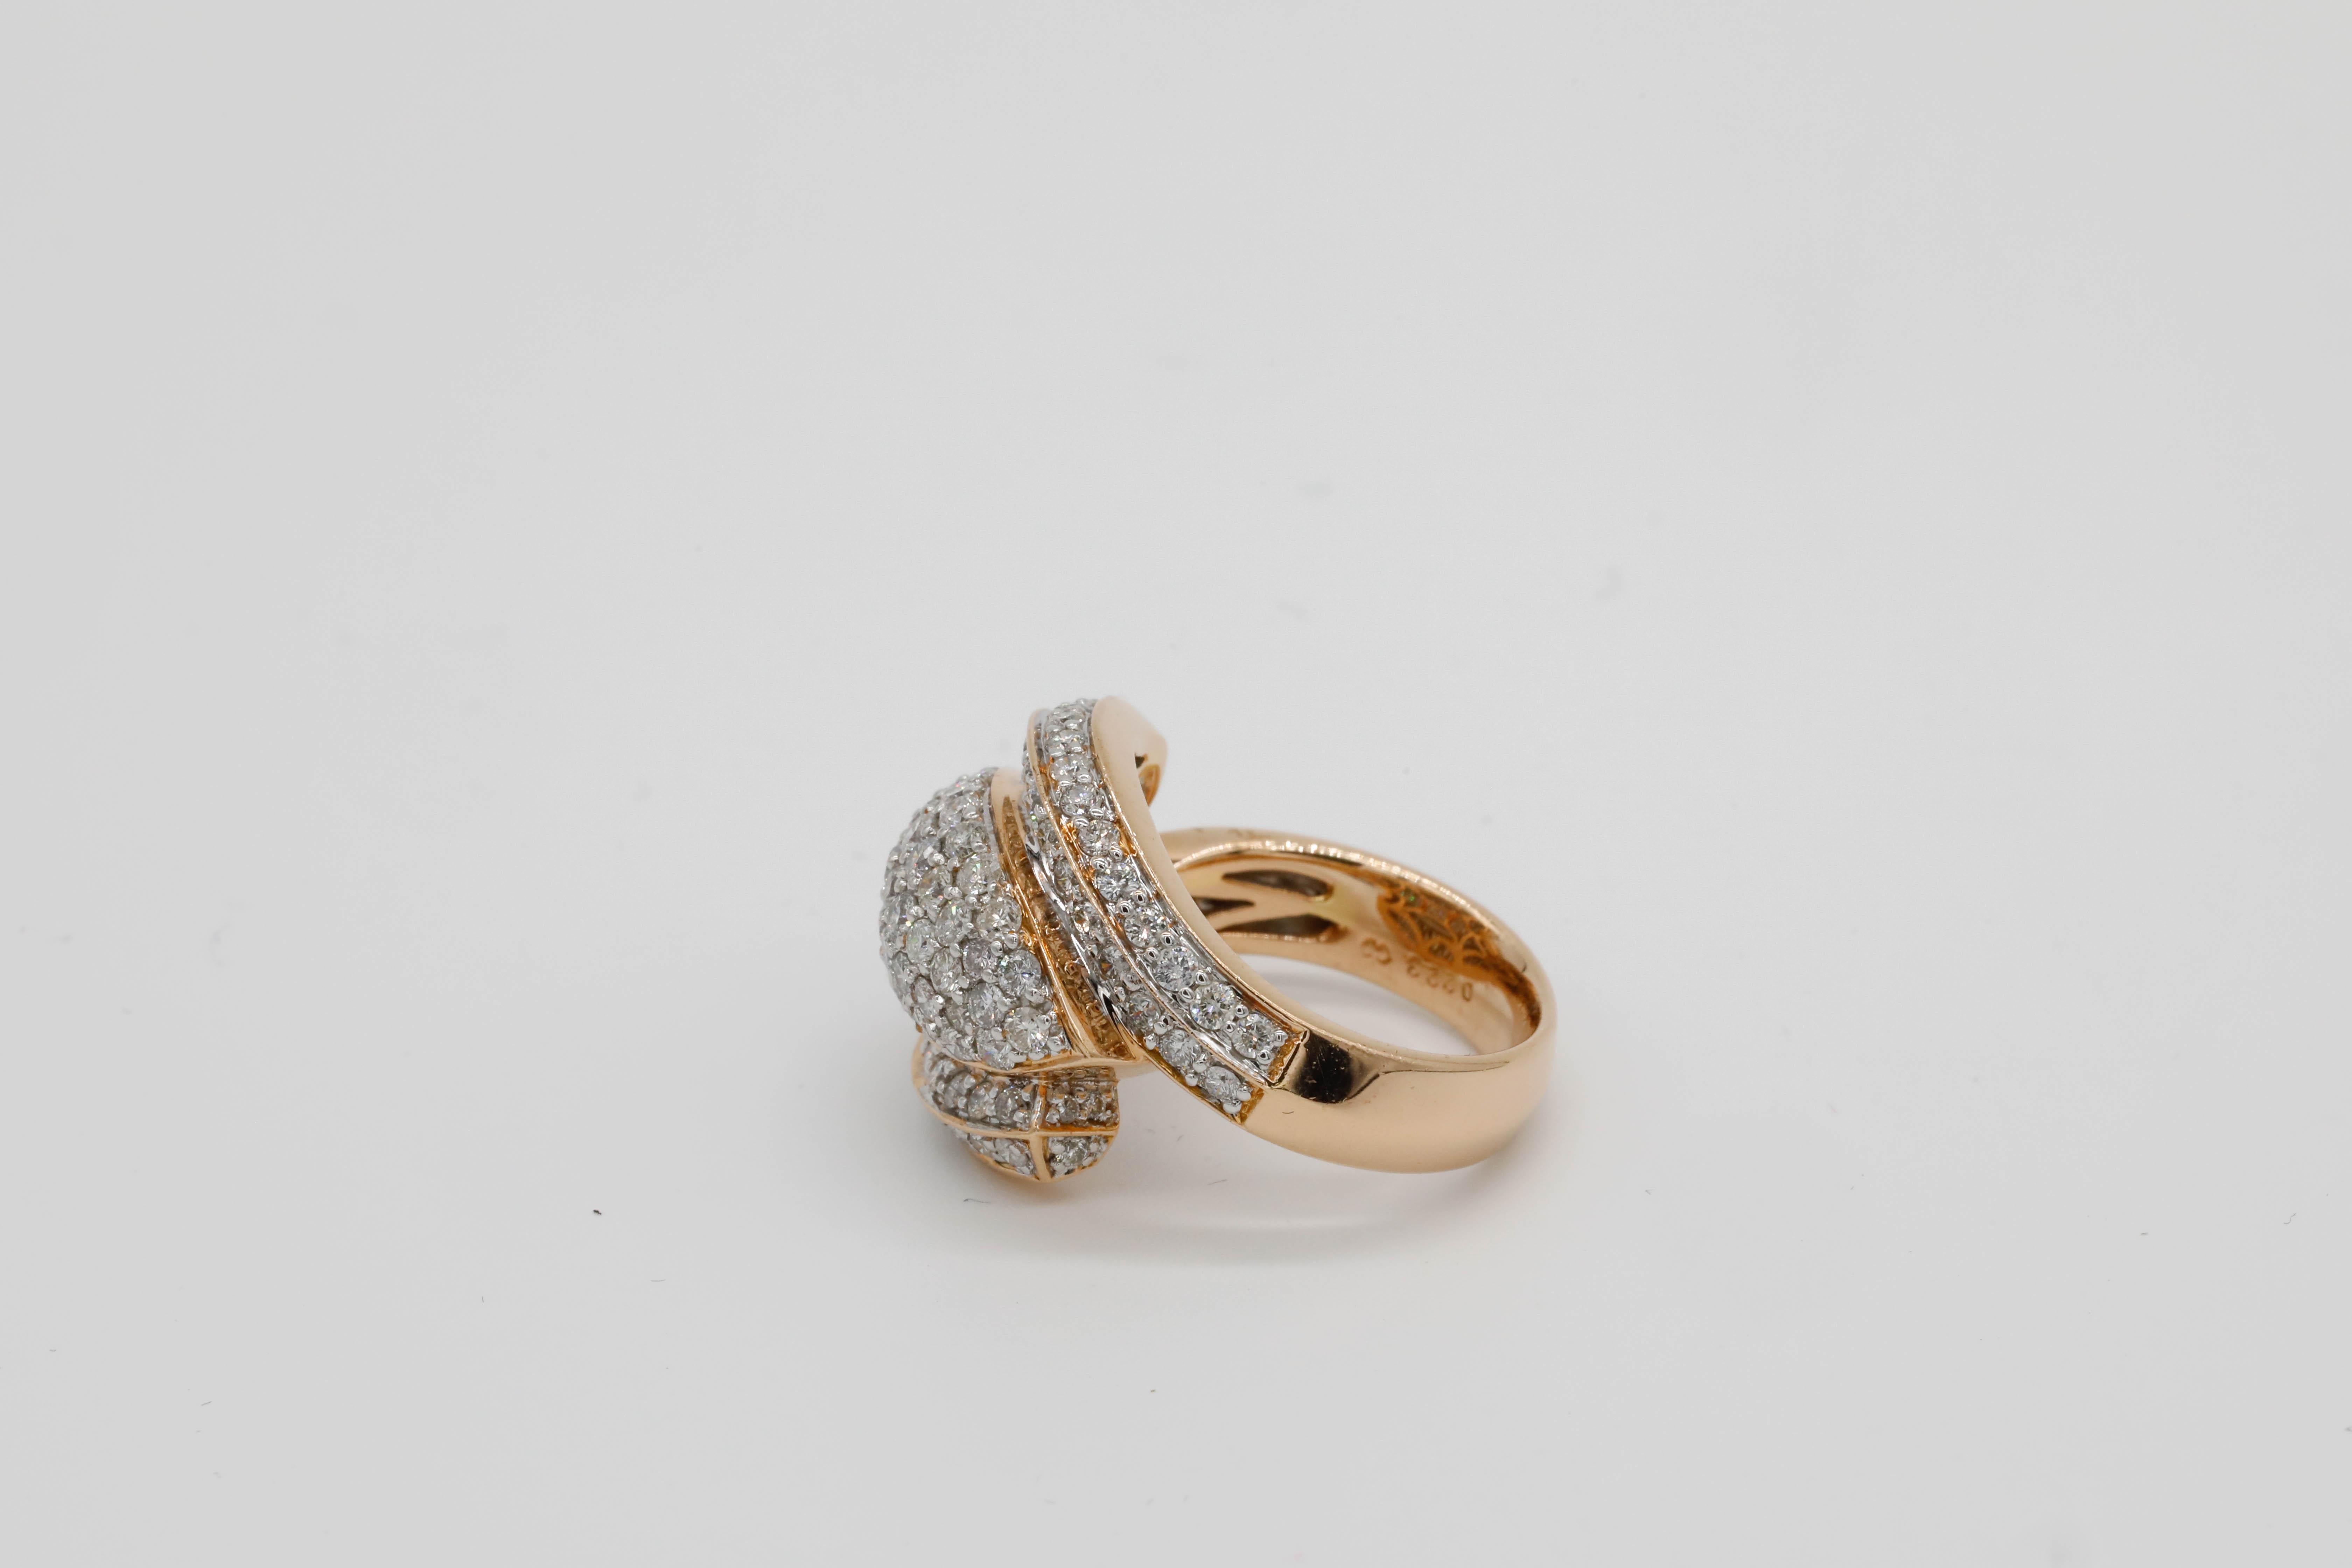 2.25 Carat Round Cut Diamond Pave 14k Rose Gold Dome Wrap Ring

This modern ring features a total of 2.25 carats of diamond round shape Set in 18K White Gold.

We guarantee all products sold and our number one priority is your complete 100%